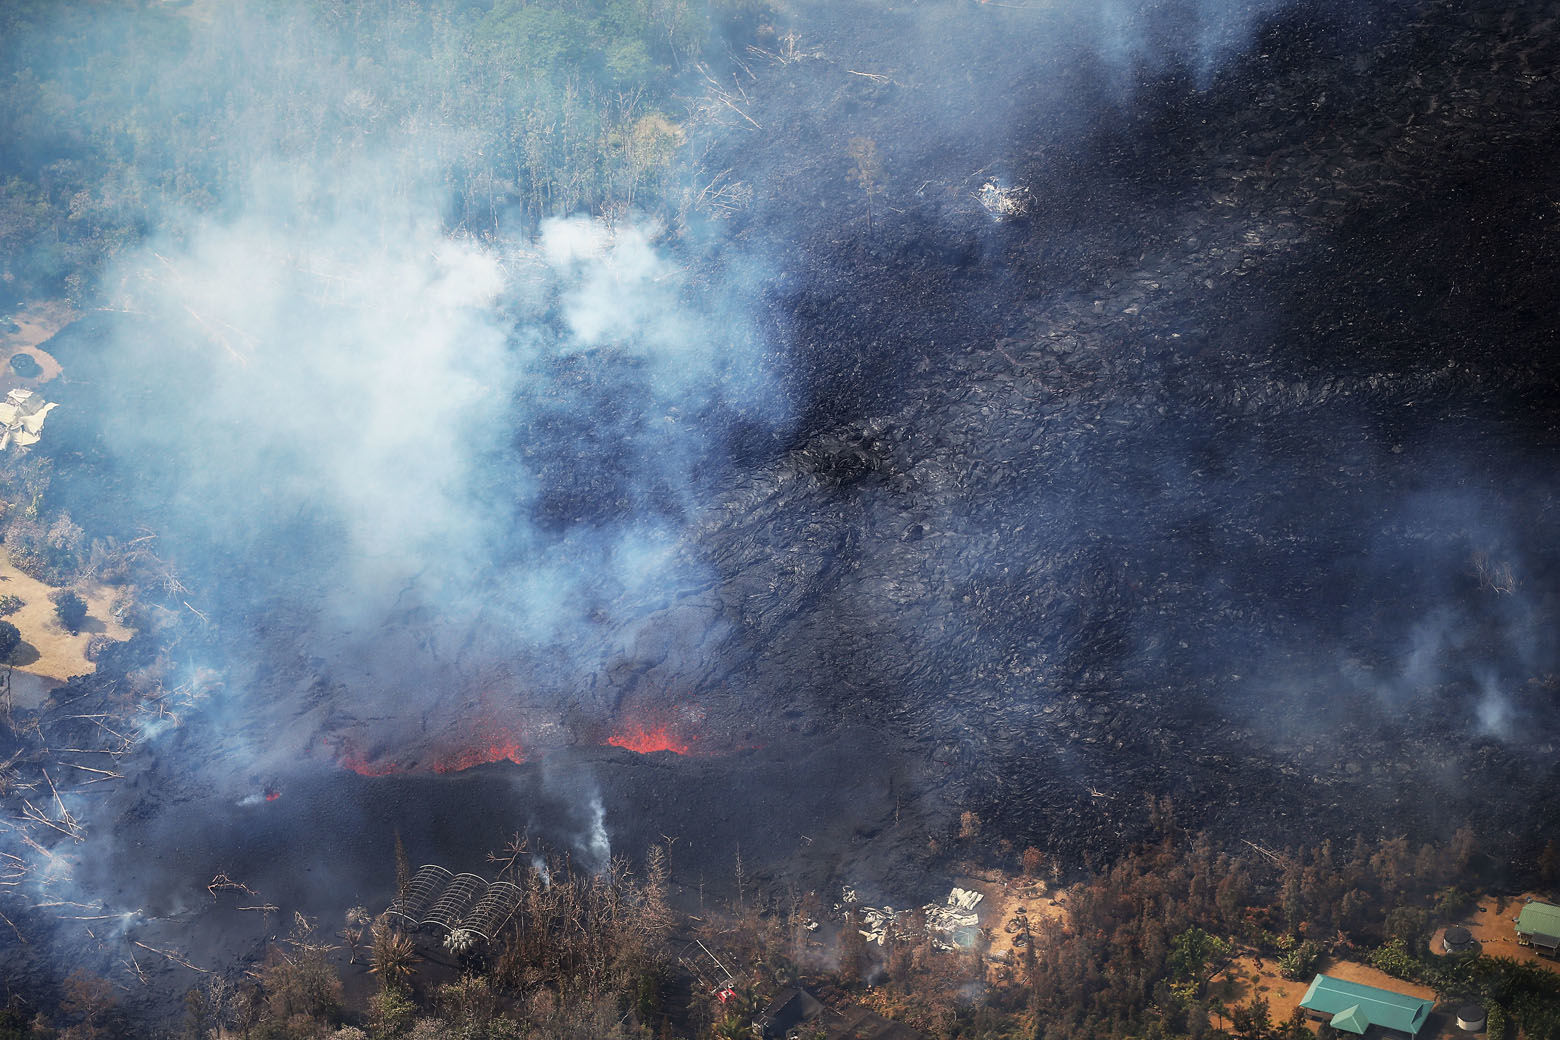 PAHOA, HI - MAY 06:  Lava from volcanic fissures slowly flows and overtakes structures and trees in the Leilani Estates neighborhood in the aftermath of eruptions from the the Kilauea volcano on Hawaii's Big Island on May 6, 2018 in Pahoa, Hawaii. A magnitude 6.9 earthquake struck the island May 4. The volcano has spewed lava and high levels of sulfur gas into communities, leading officials to order 1,700 to evacuate. Officials have confirmed 26 homes have now been destroyed by lava in Leilani Estates.  (Photo by Mario Tama/Getty Images)